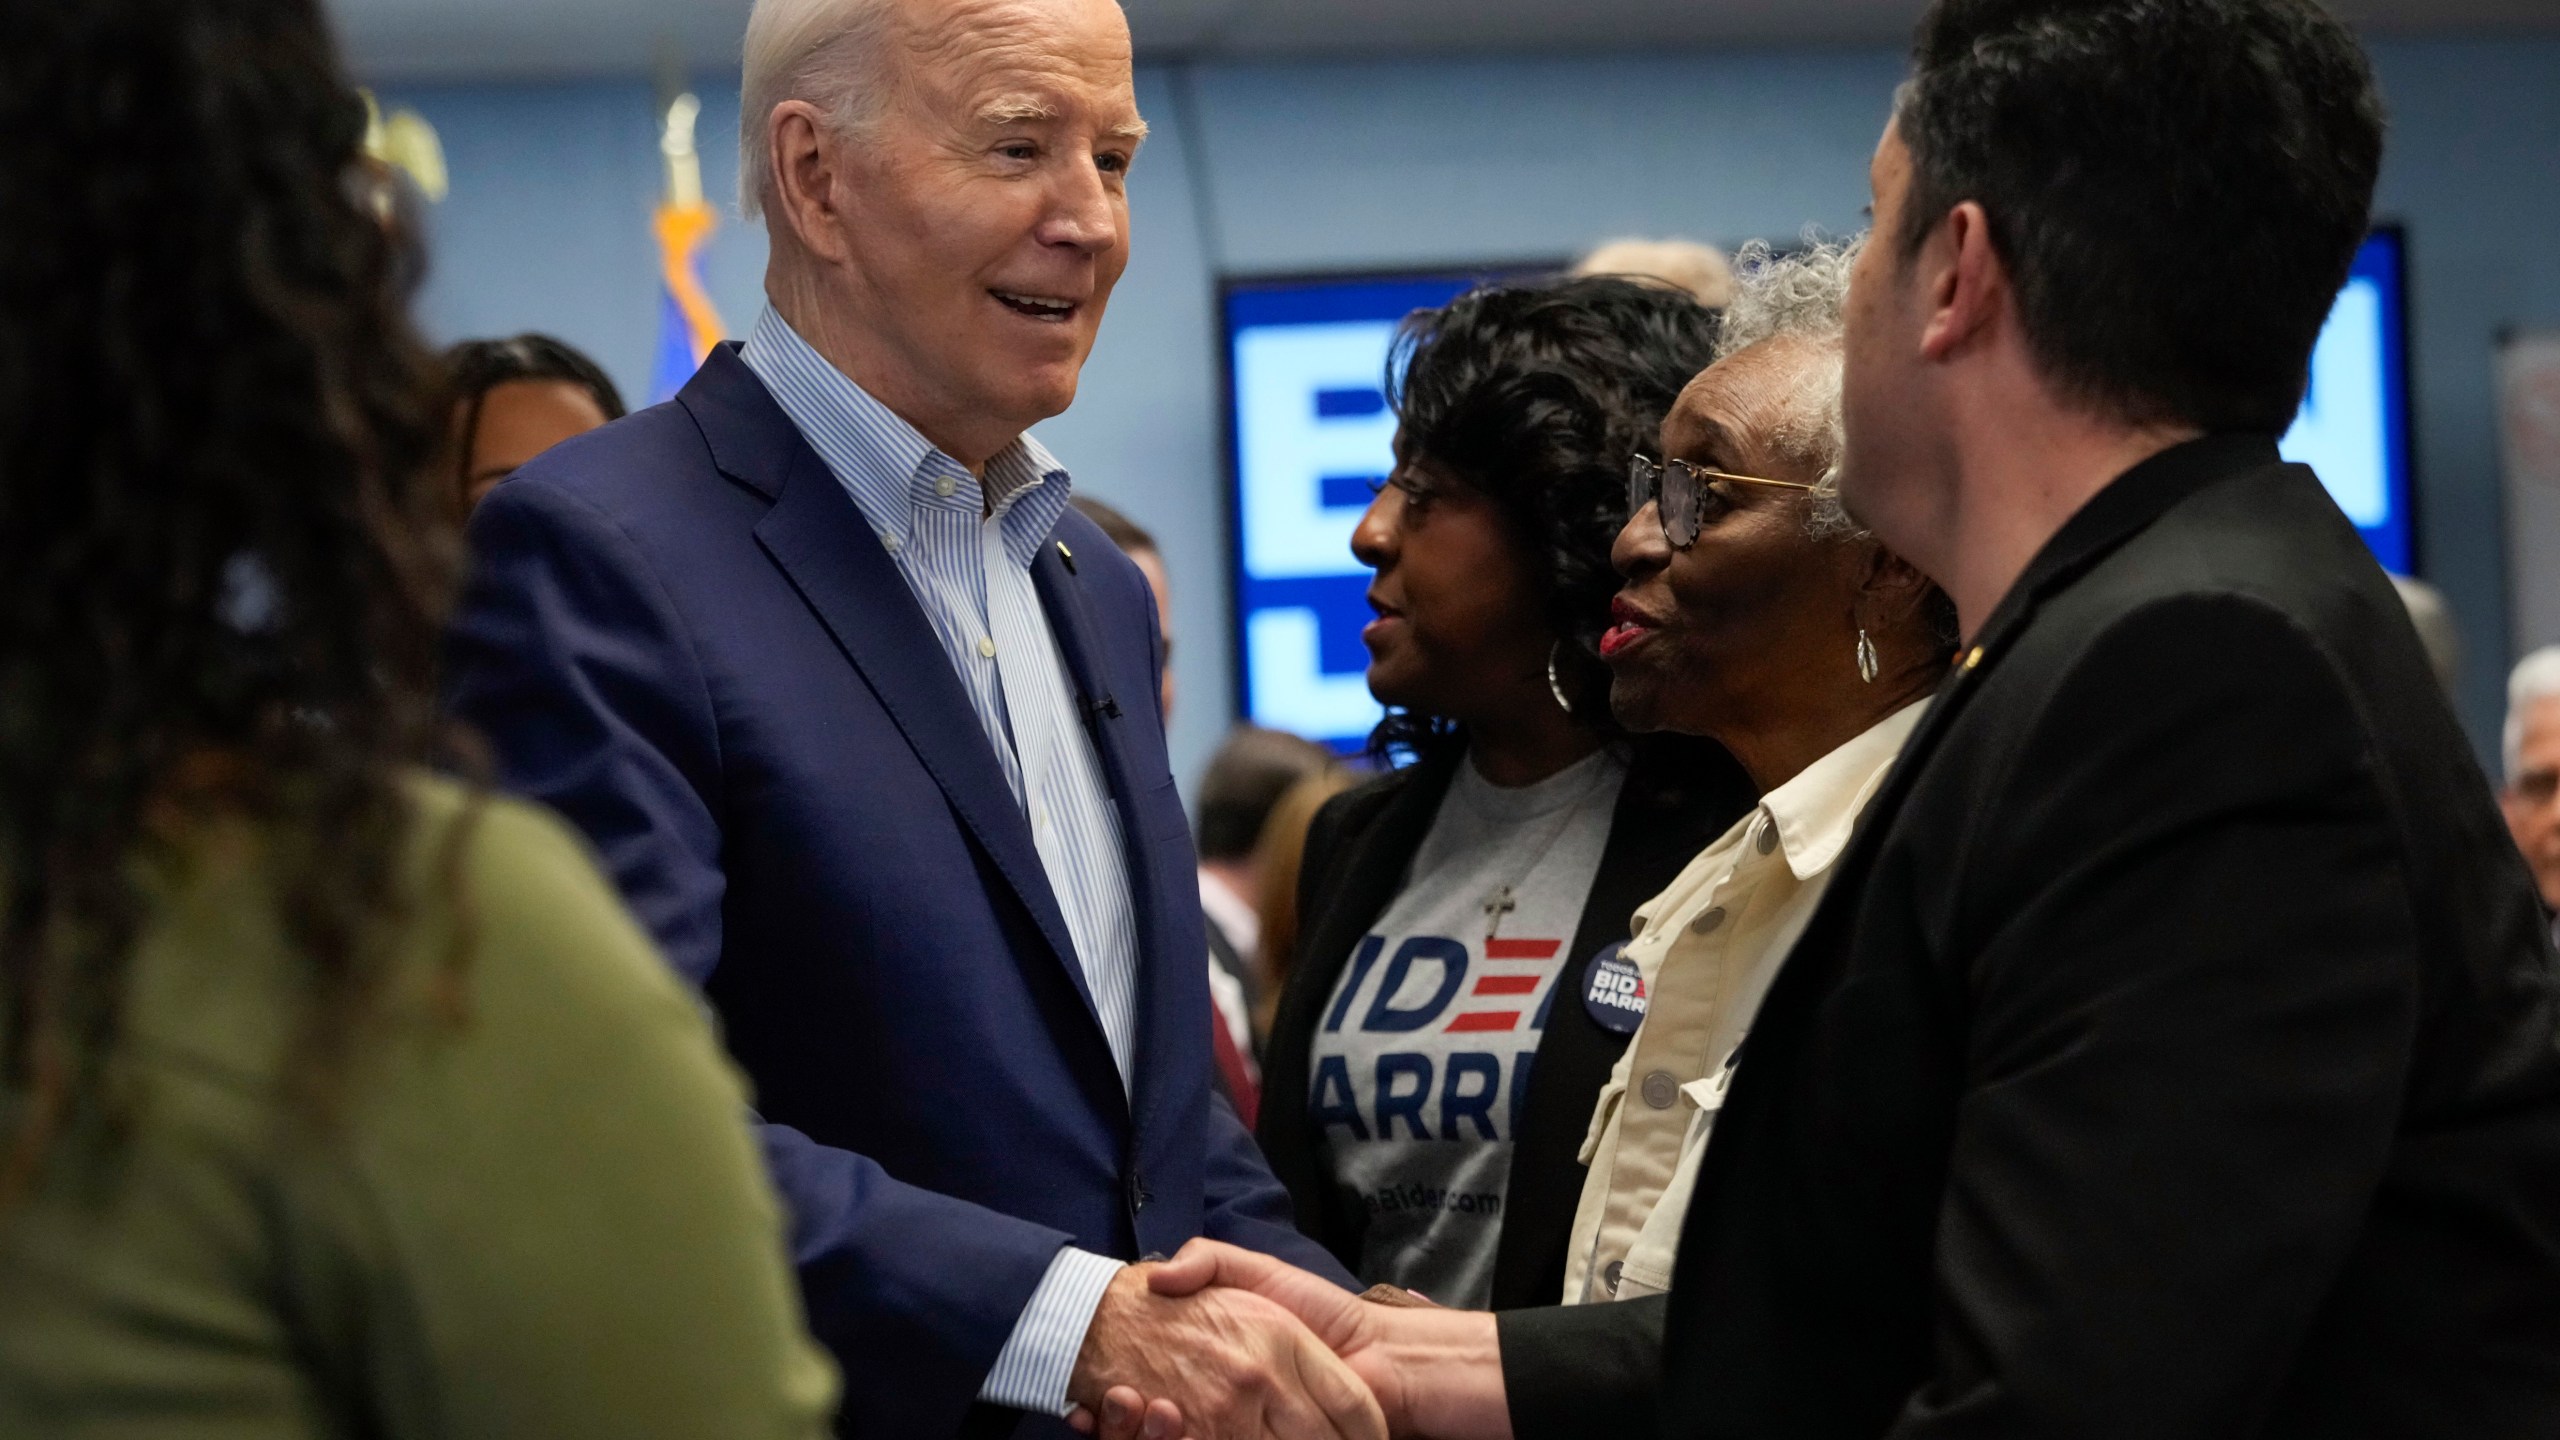 President Joe Biden greets people after speaking at the Washoe Democratic Party Office in Reno, Nev., Tuesday March 19, 2024. (AP Photo/Jacquelyn Martin)